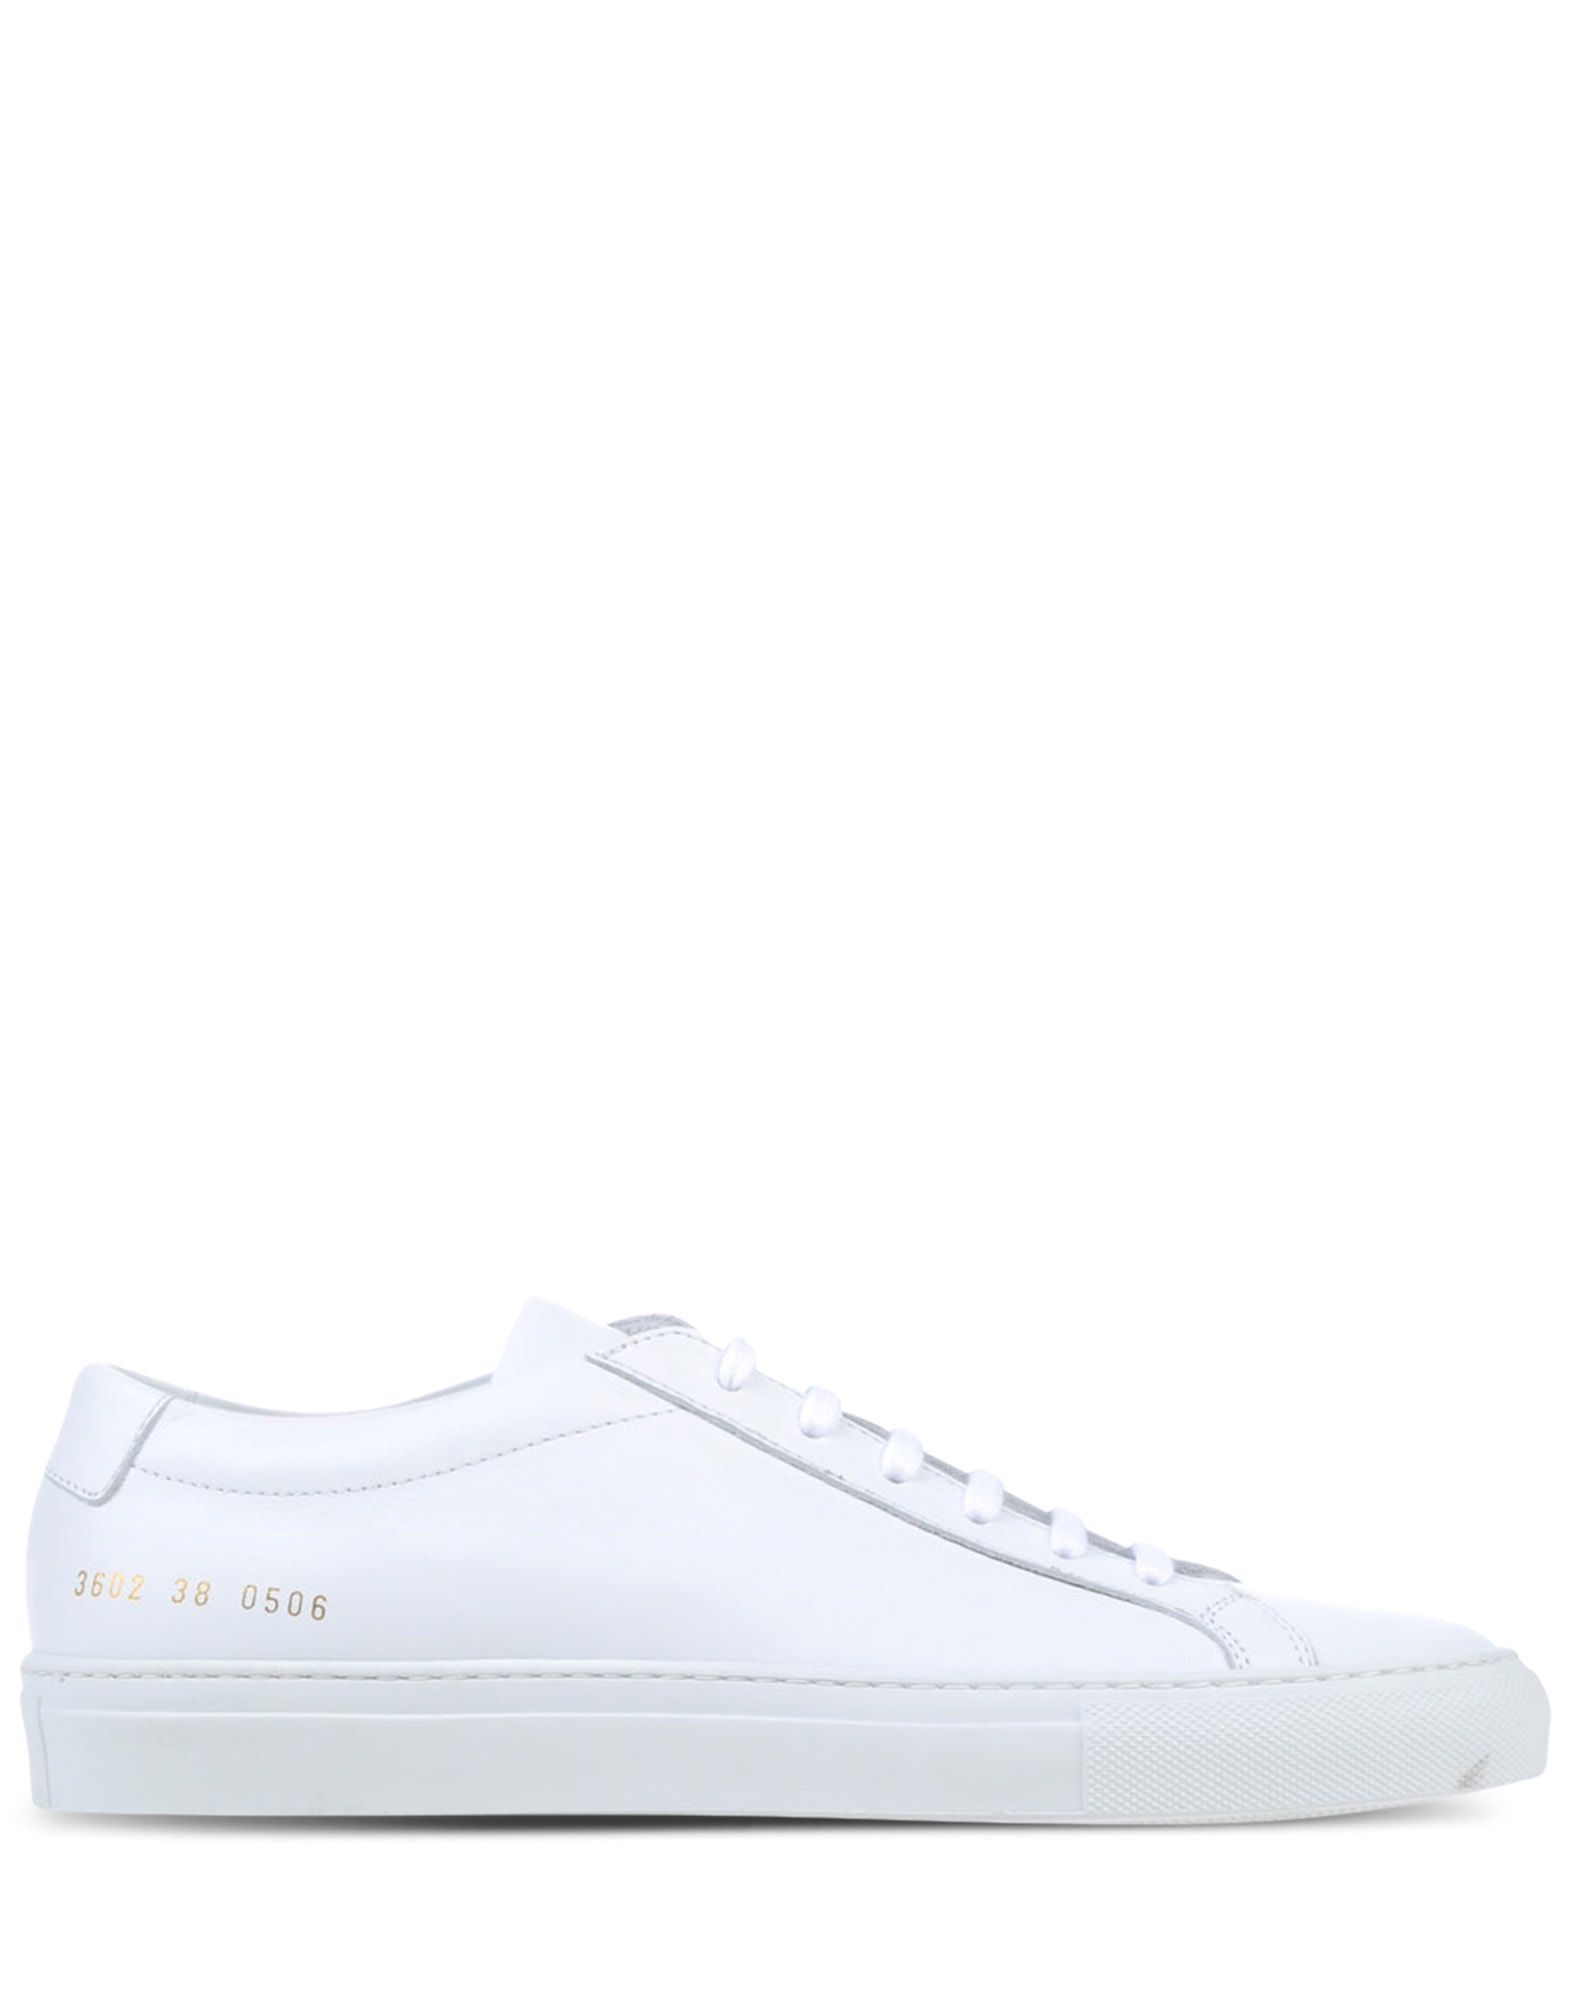 WOMAN BY COMMON PROJECTS Low-tops - Item 44719125 | Shoe Scribe